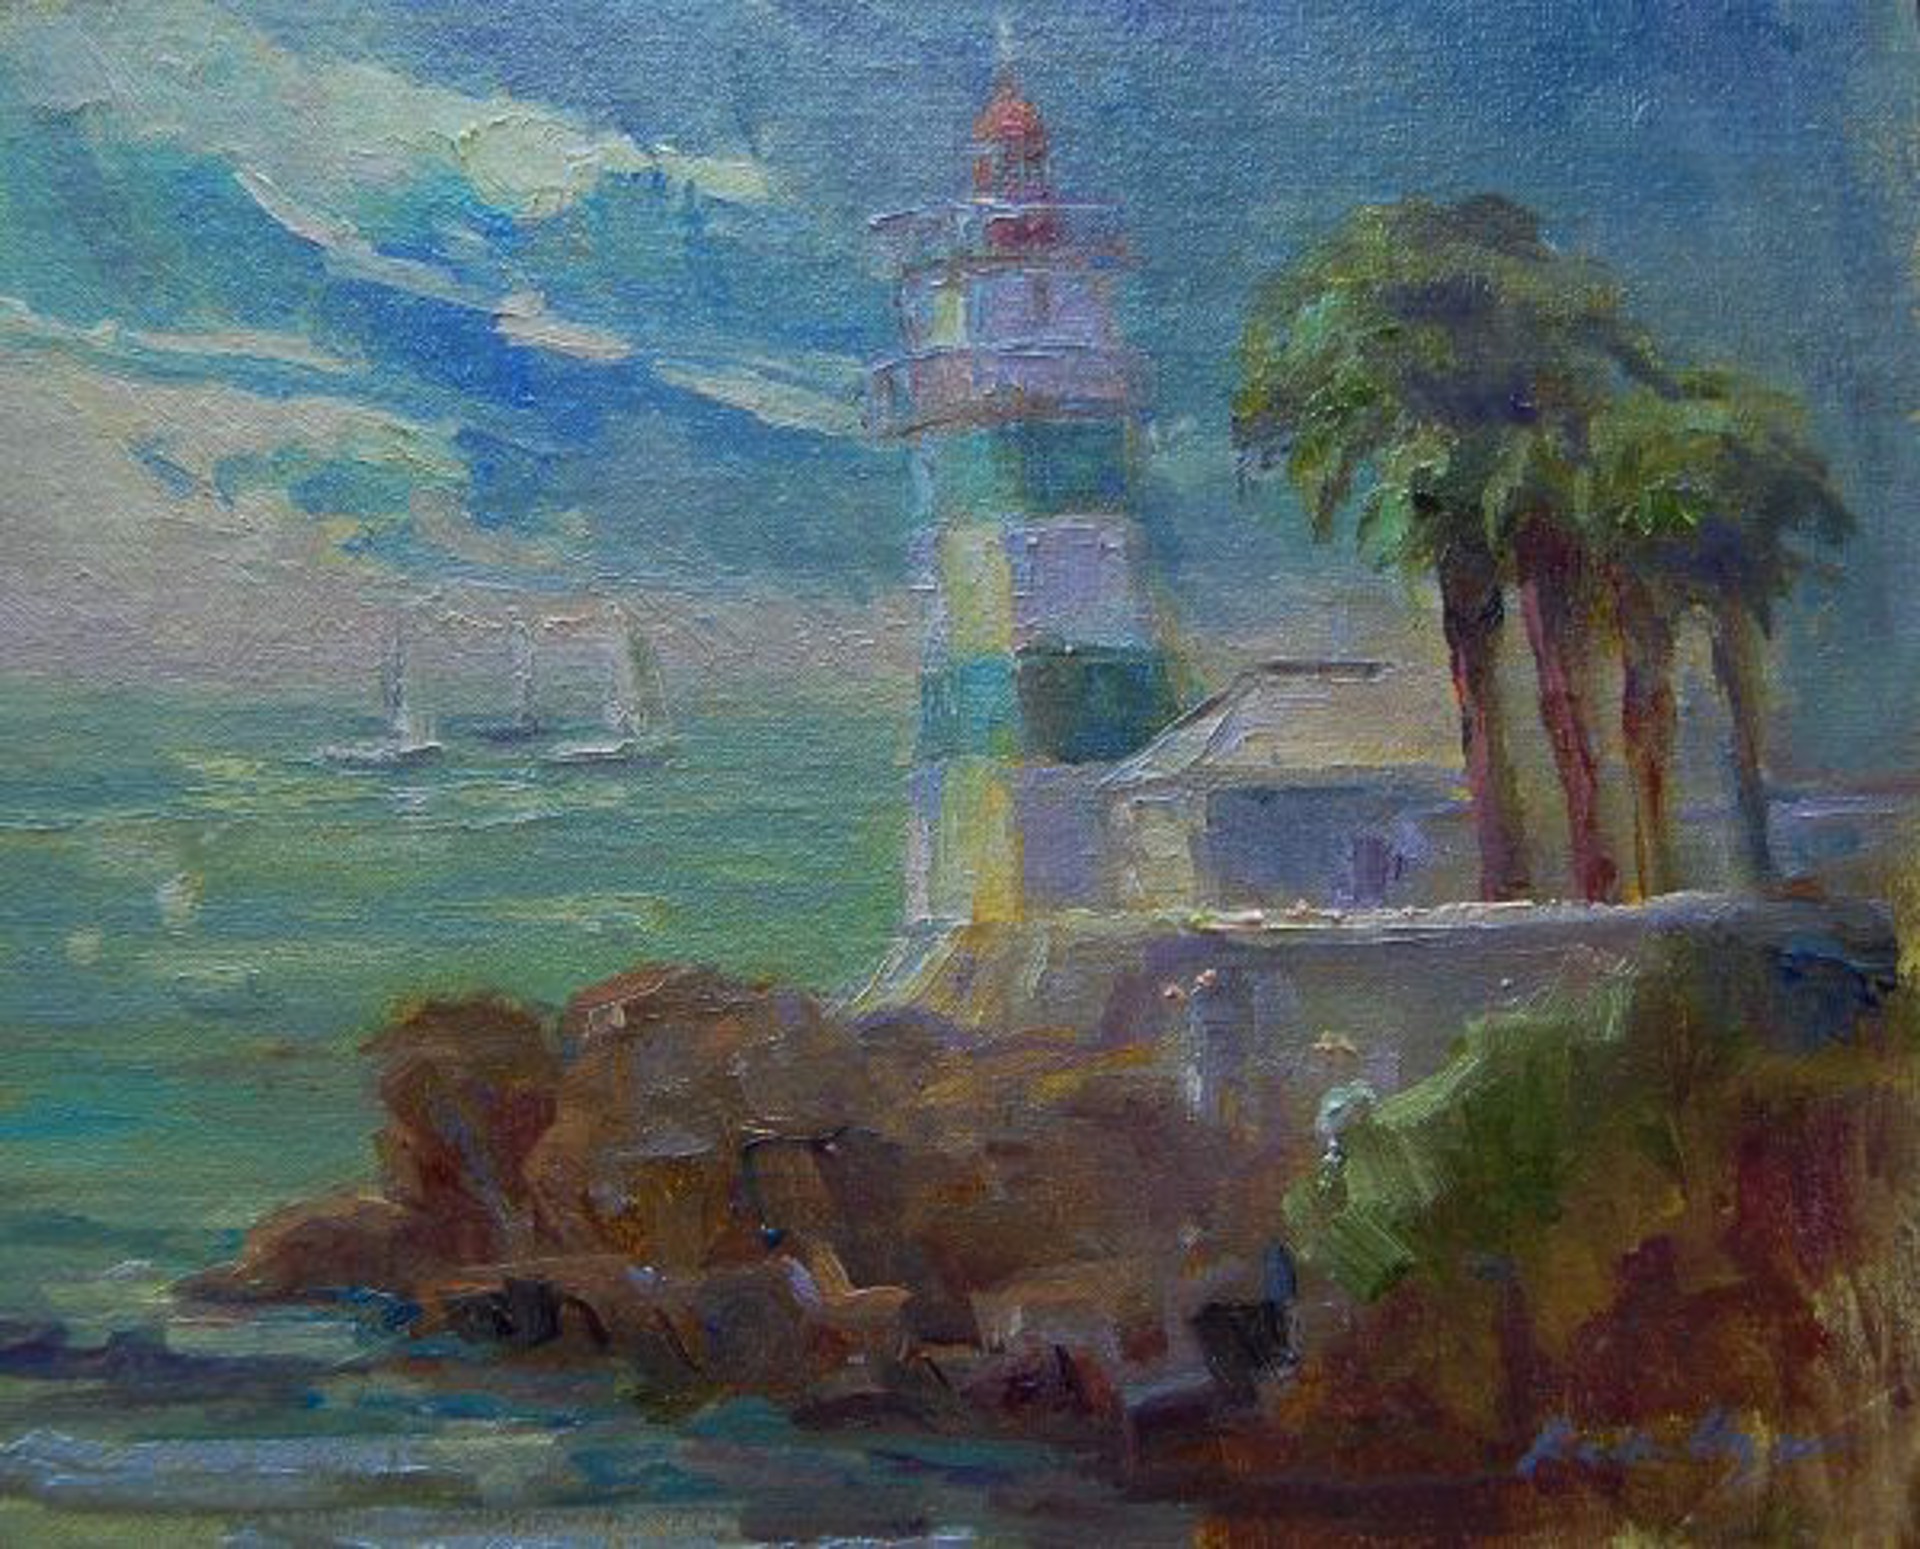 The Building of the Navy in Cascais by Karen Hewitt Hagan